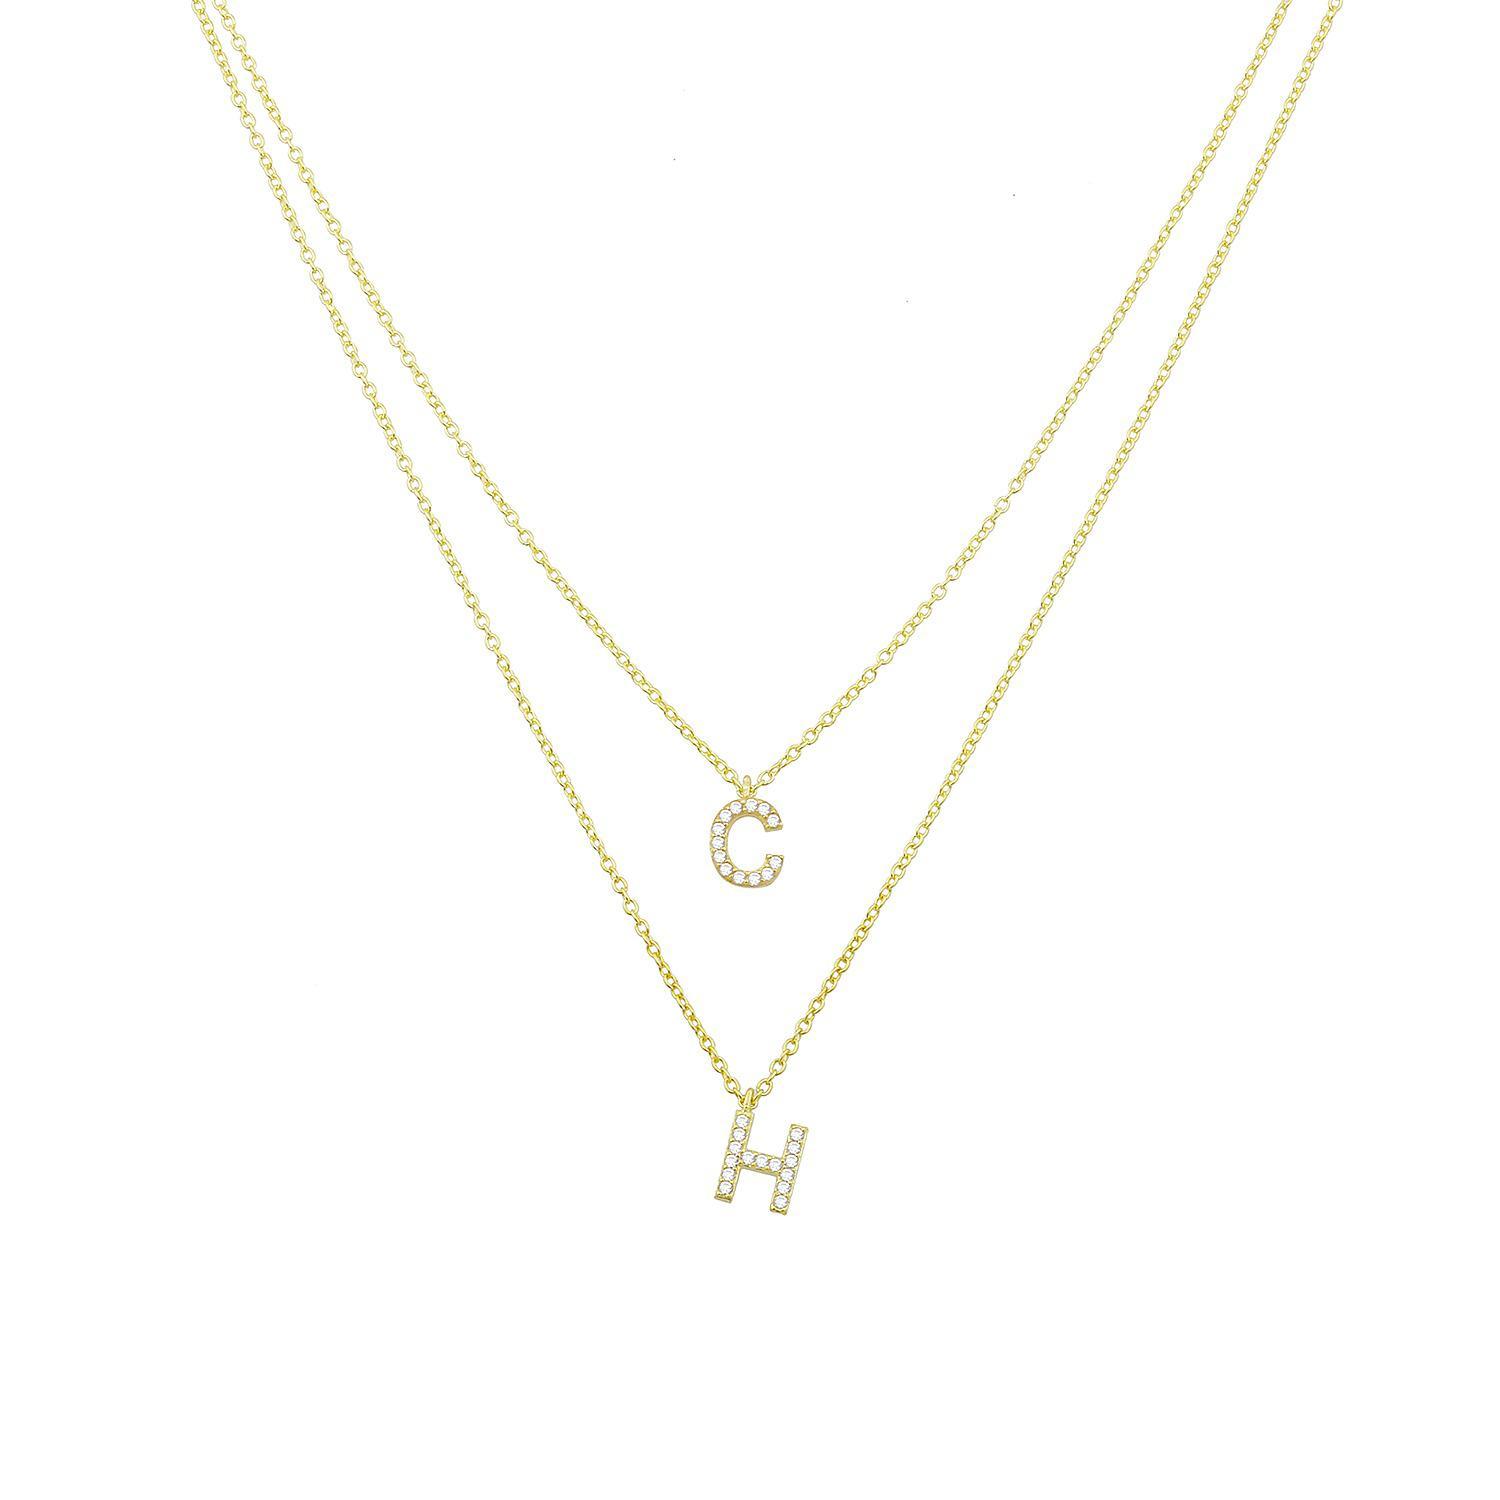 Personalized 14K Gold-Plated Sterling Silver or Sterling Silver Double Diamond-Shaped Monogram Pendant, Women's, Grey Type